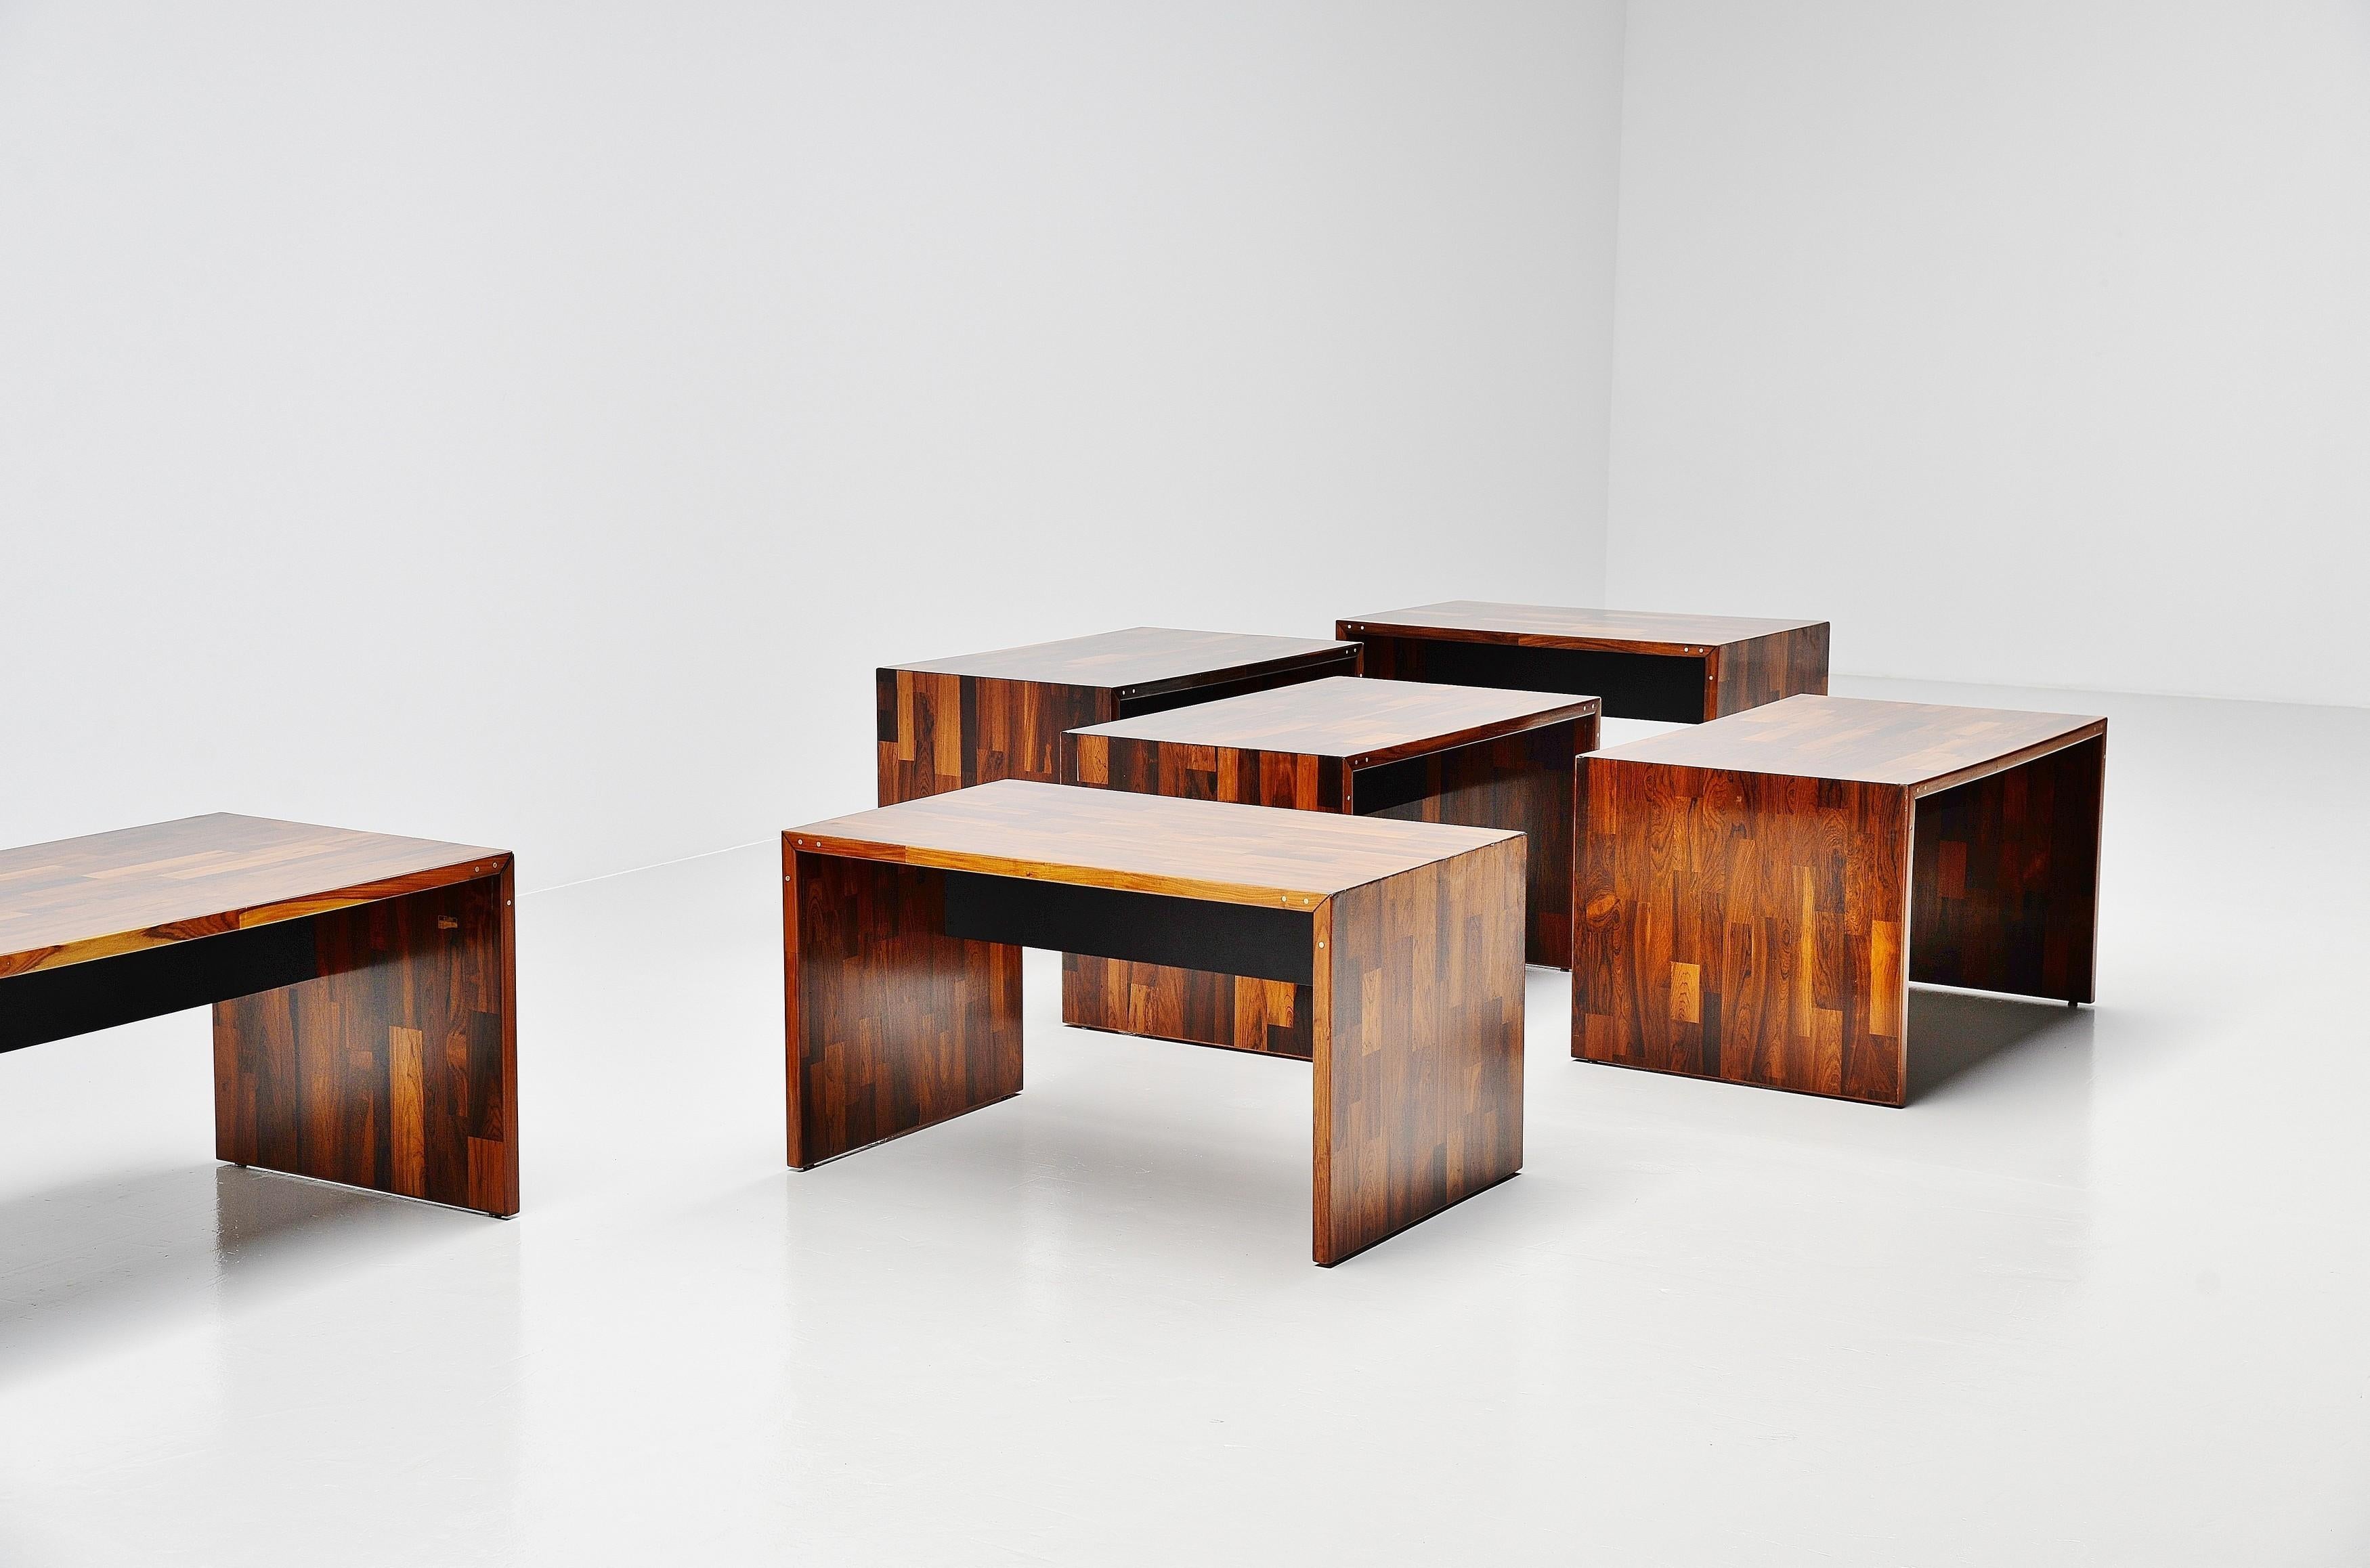 Fantastic large set of 6 folding desks designed by recently passed designer Jorge Zalszupin and manufactured in his own company L'Atelier, Brazil, 1959. These are folding desks are part of a series of desks that belonged to ESAF - School of Farm